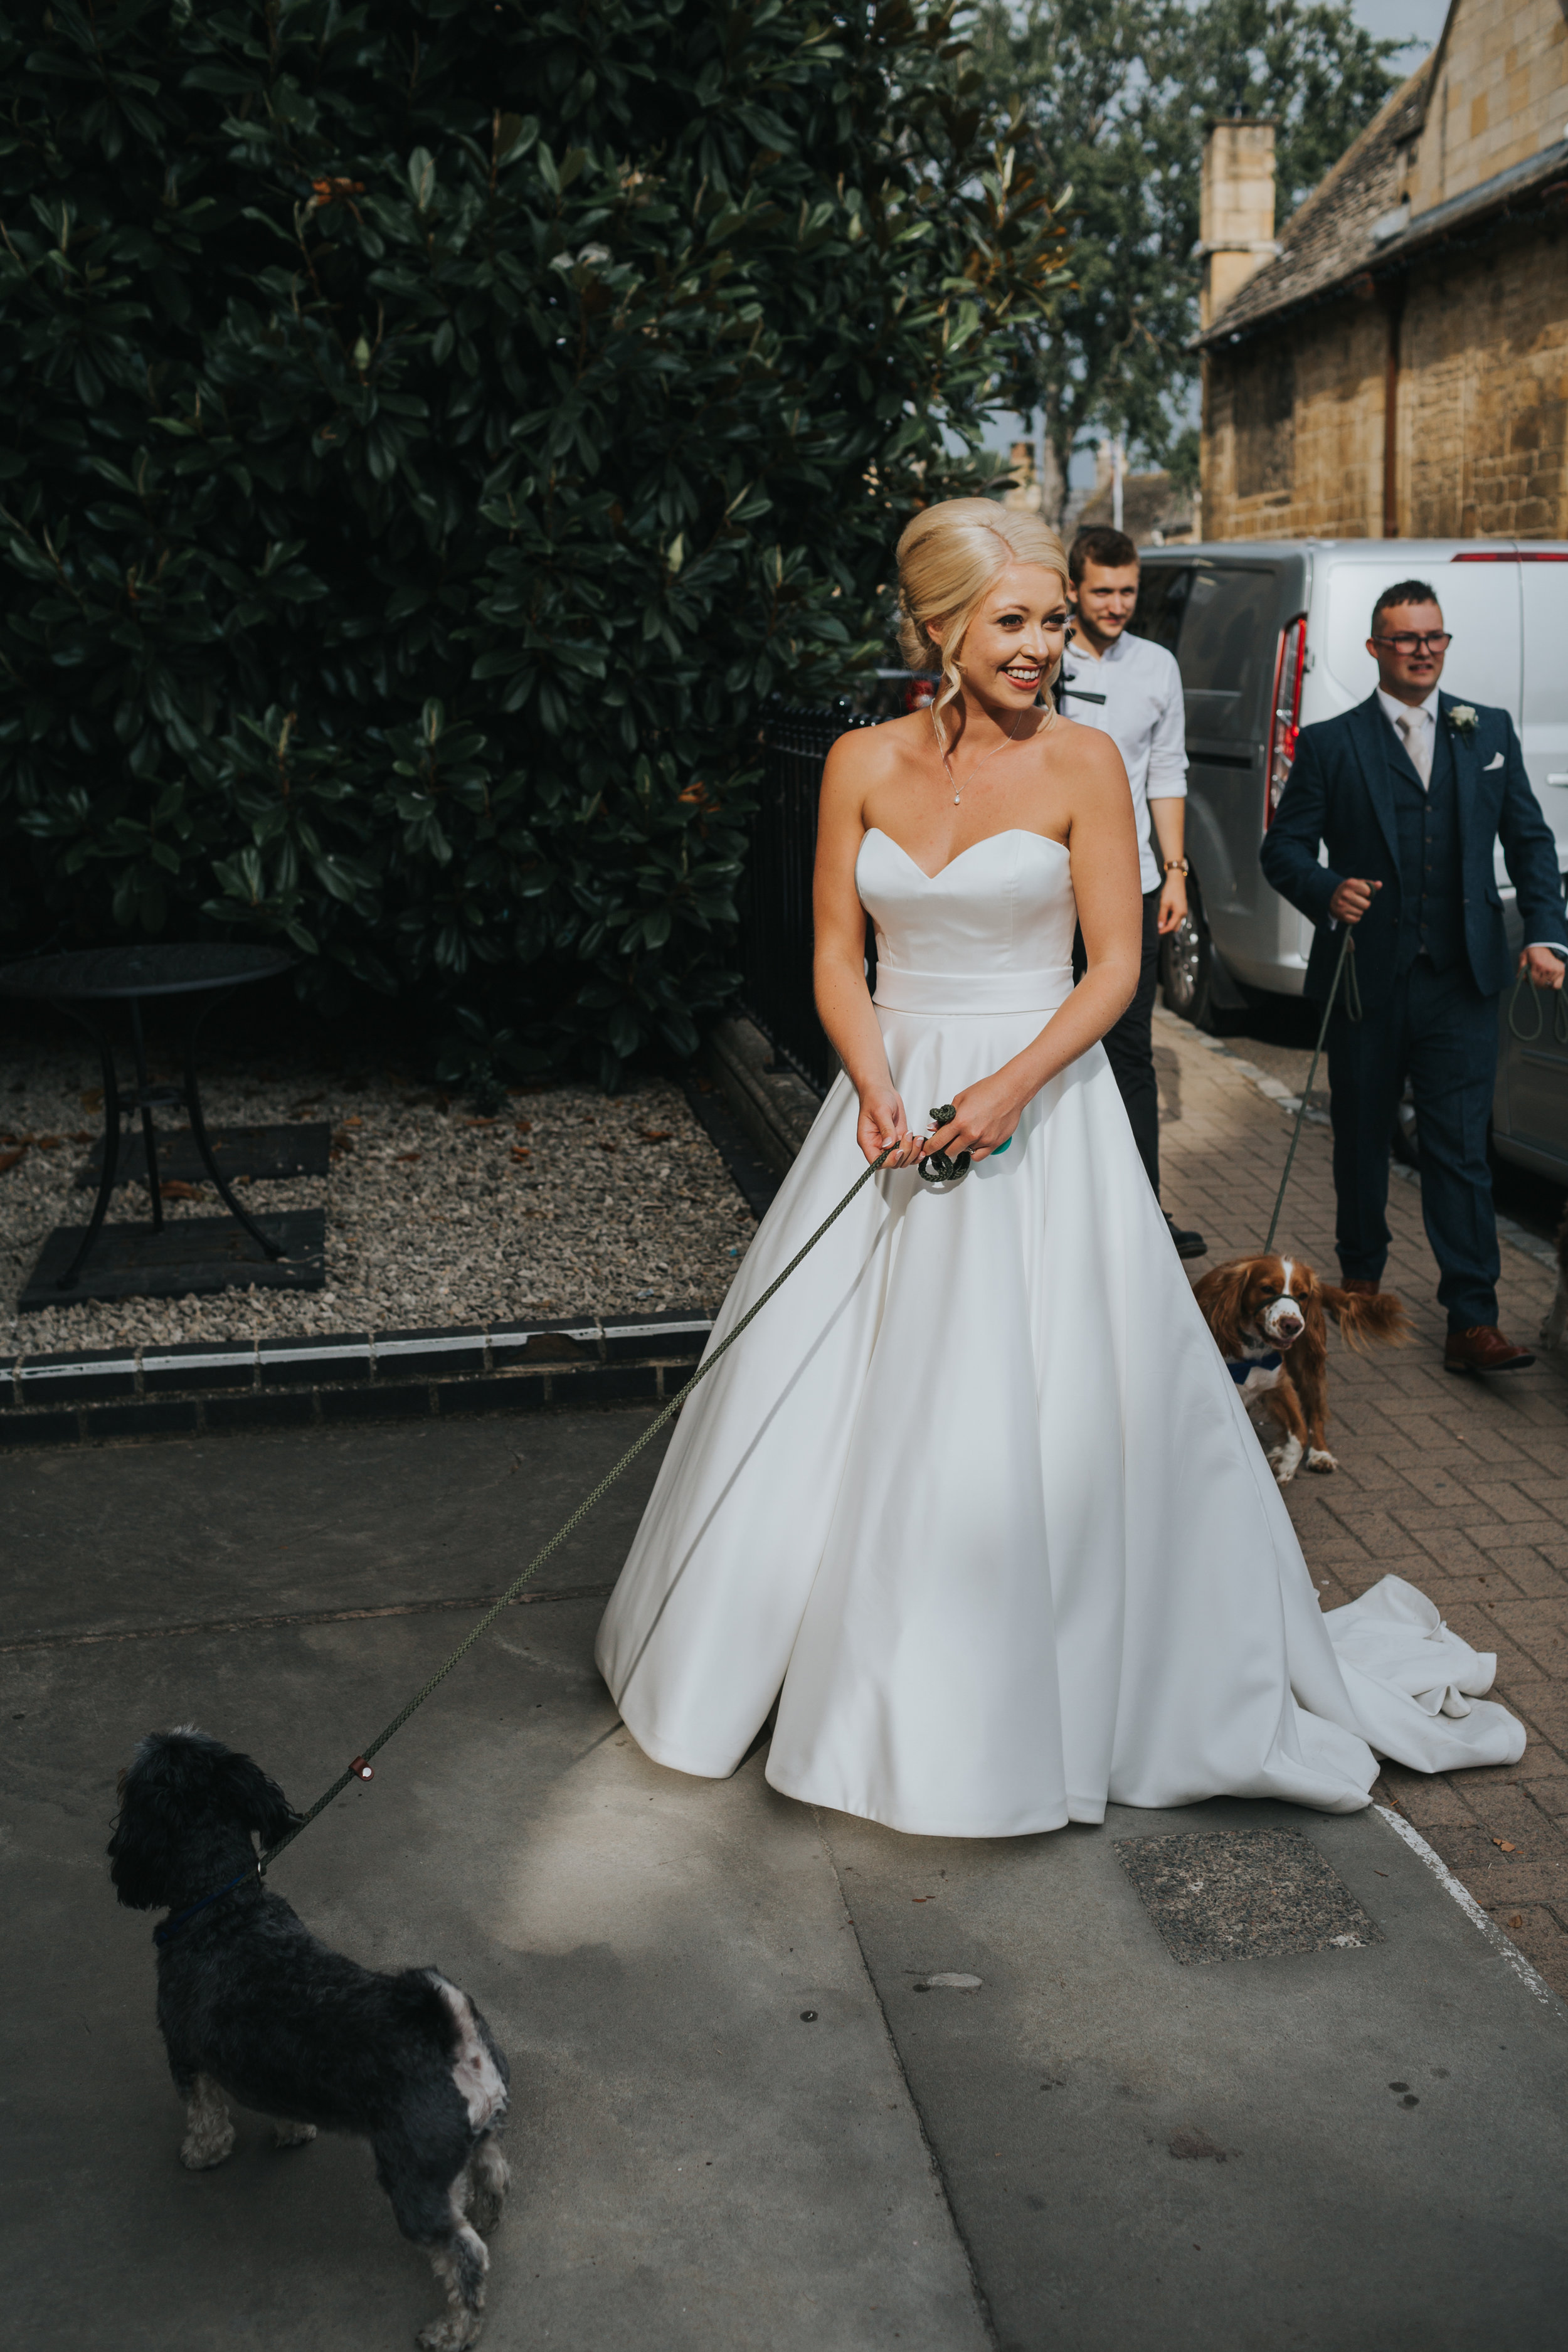 Bride stands in the sunlight holding her dog on a lead. (Copy)